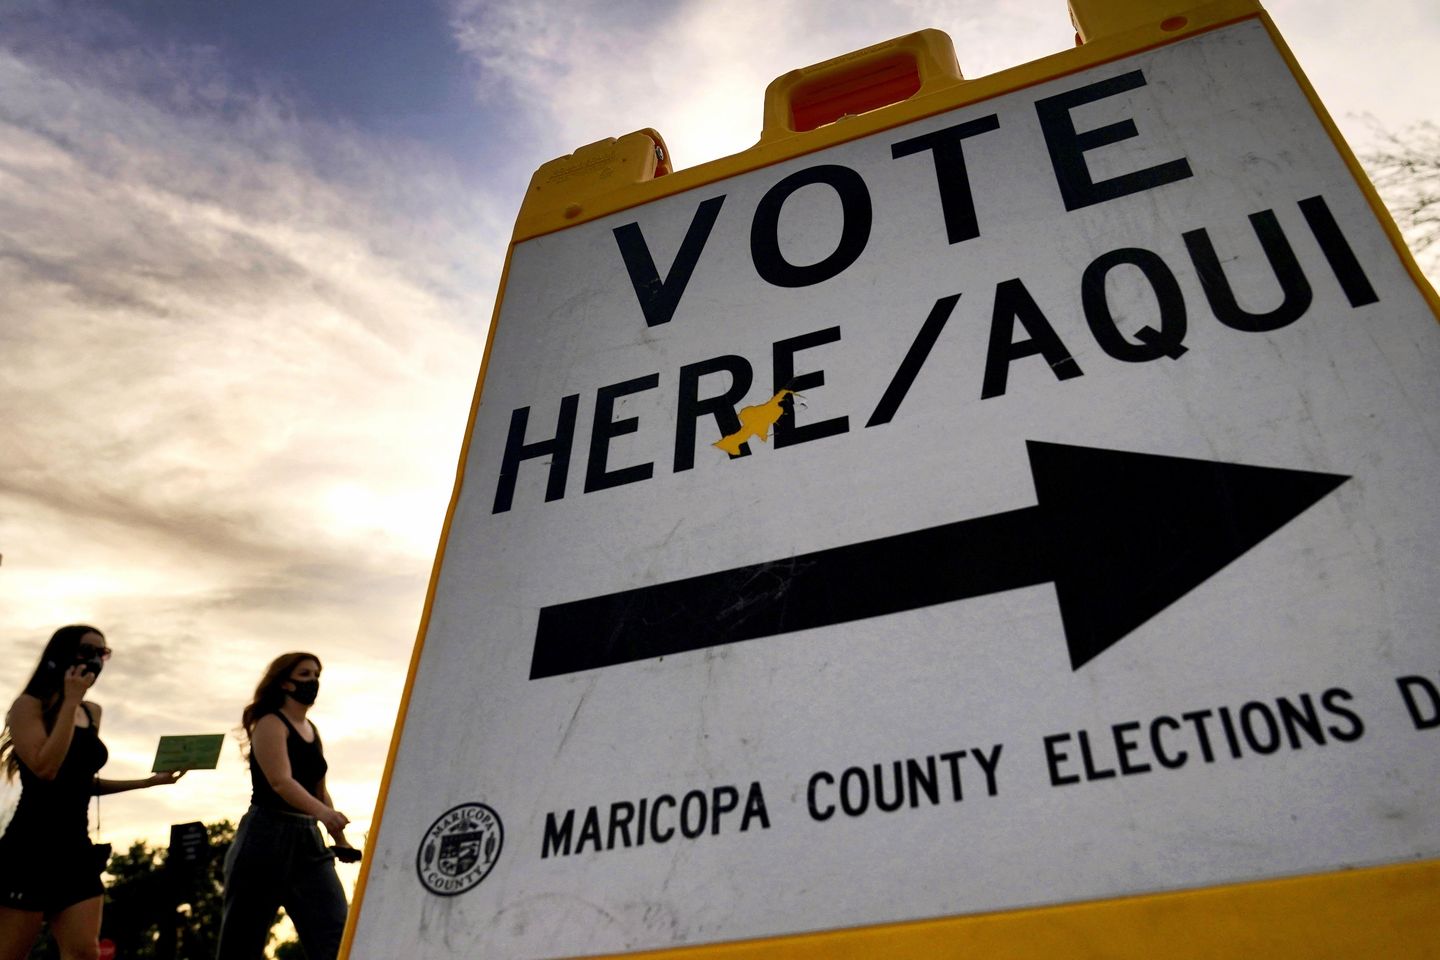 No charges for 151 Arizona voters vetted over fraud claims